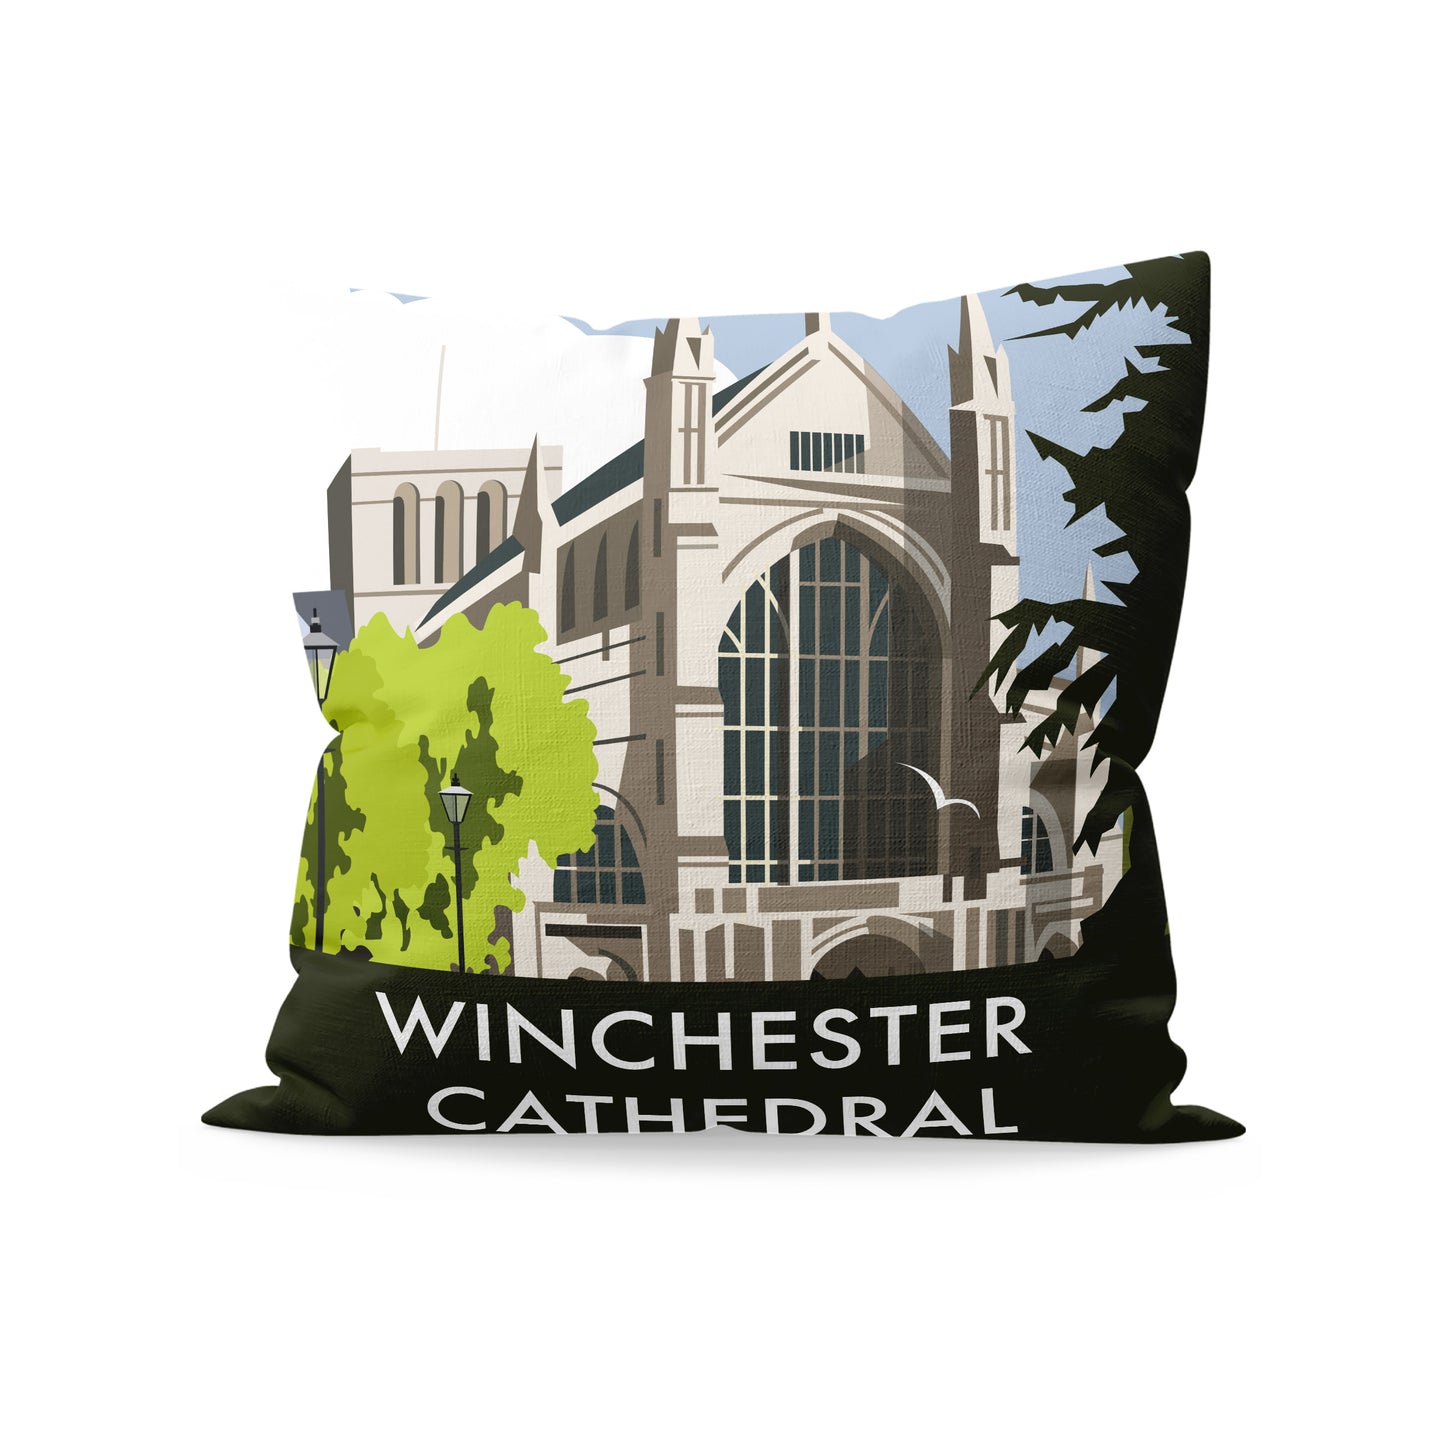 Winchester Cathedral Cushion